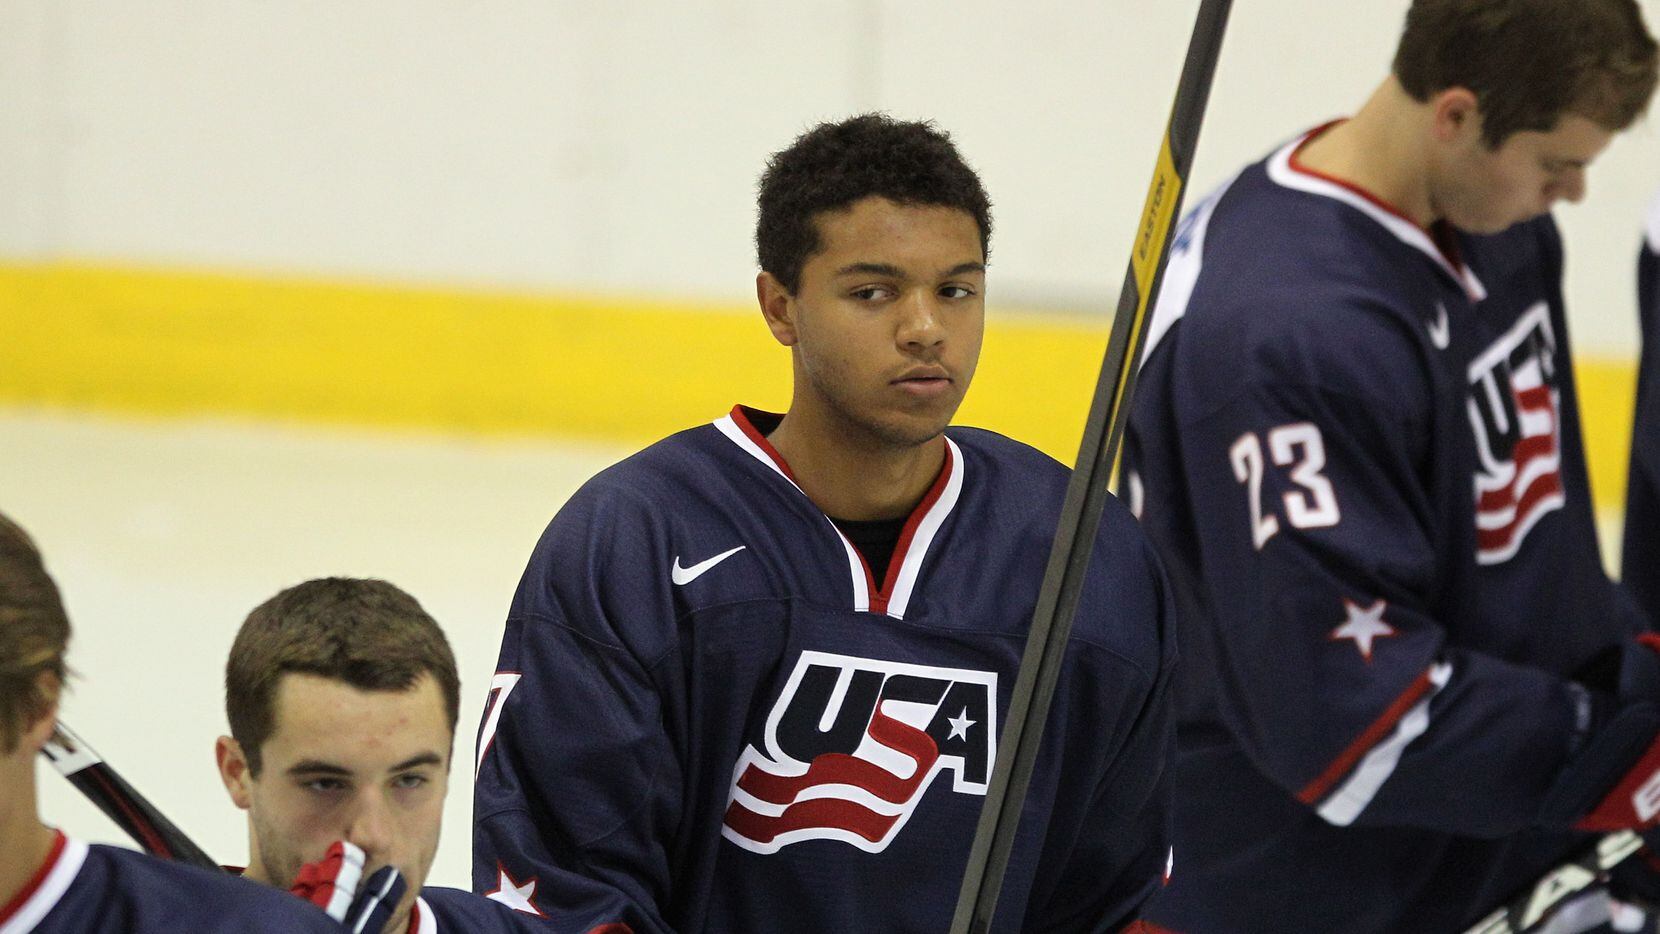 From a basketball jones to hockey: Seth Jones is in a league of his own